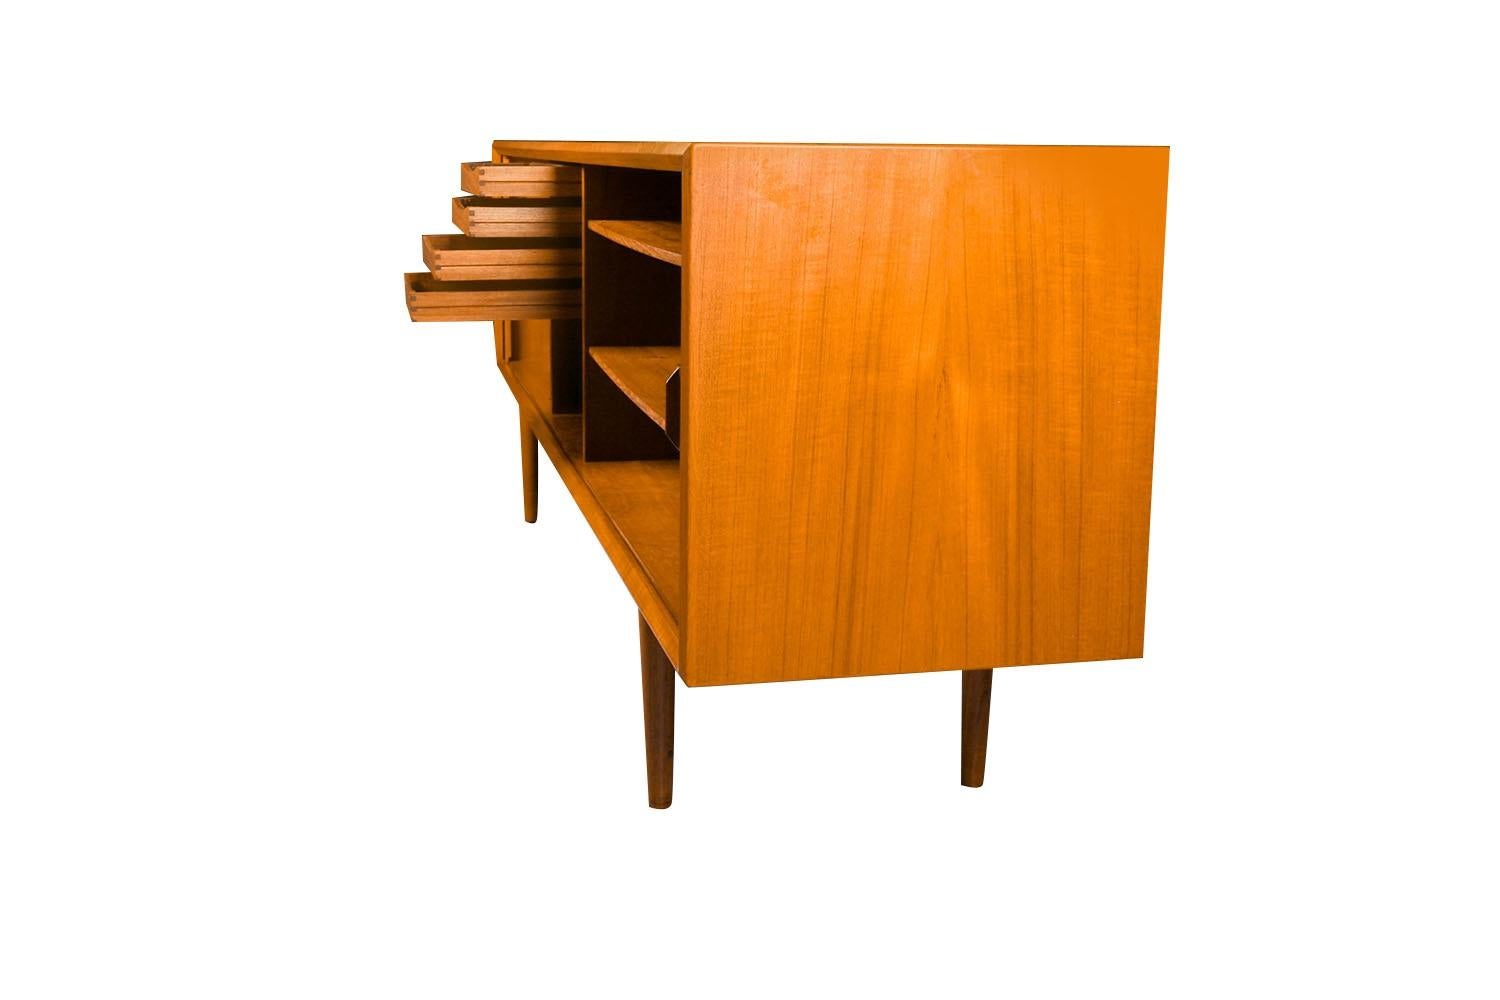 Remarkable teakwood credenza designed by Famous designer Svend Larsen for Faarup Mobelfabrik in Denmark. This piece is long, low, and just stunning!!! Notice the width it is 10? longer than most. High quality Danish Modern piece, perfect for storing